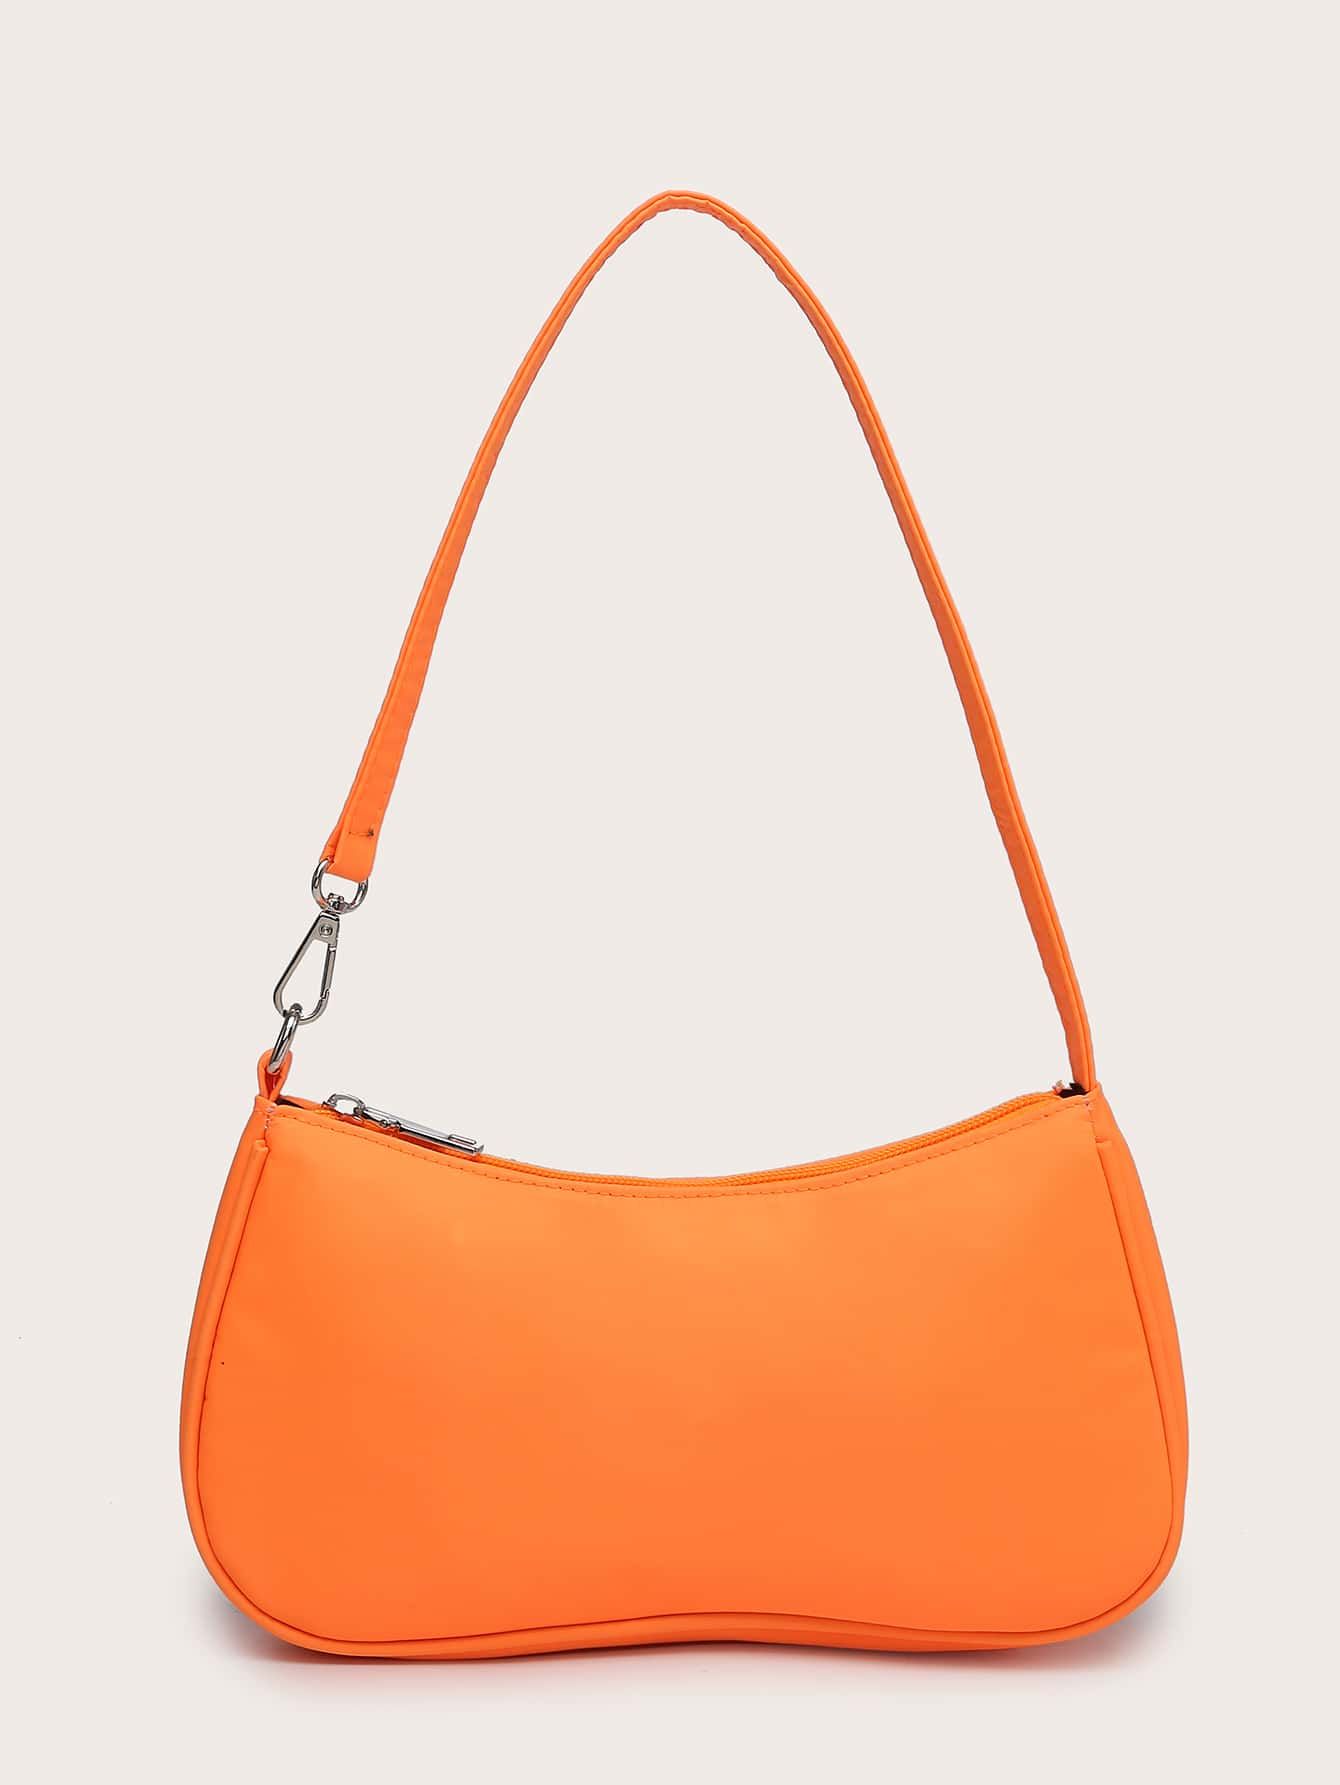 How to Wear Orange Handbag: 15 Cheerful & Chic Outfit Ideas for Women